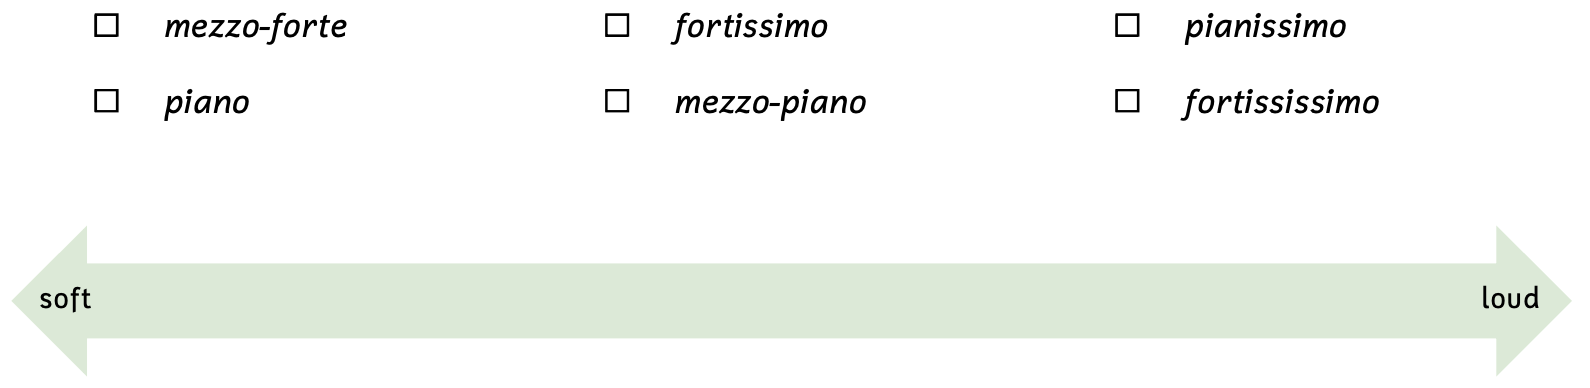 The different dynamics listed are mezzoforte, piano, fortissimo, mezzopiano, pianissimo, and fortississimo. The spectrum arrow is shown below with the softest dynamics on the left and the loudest to the right.